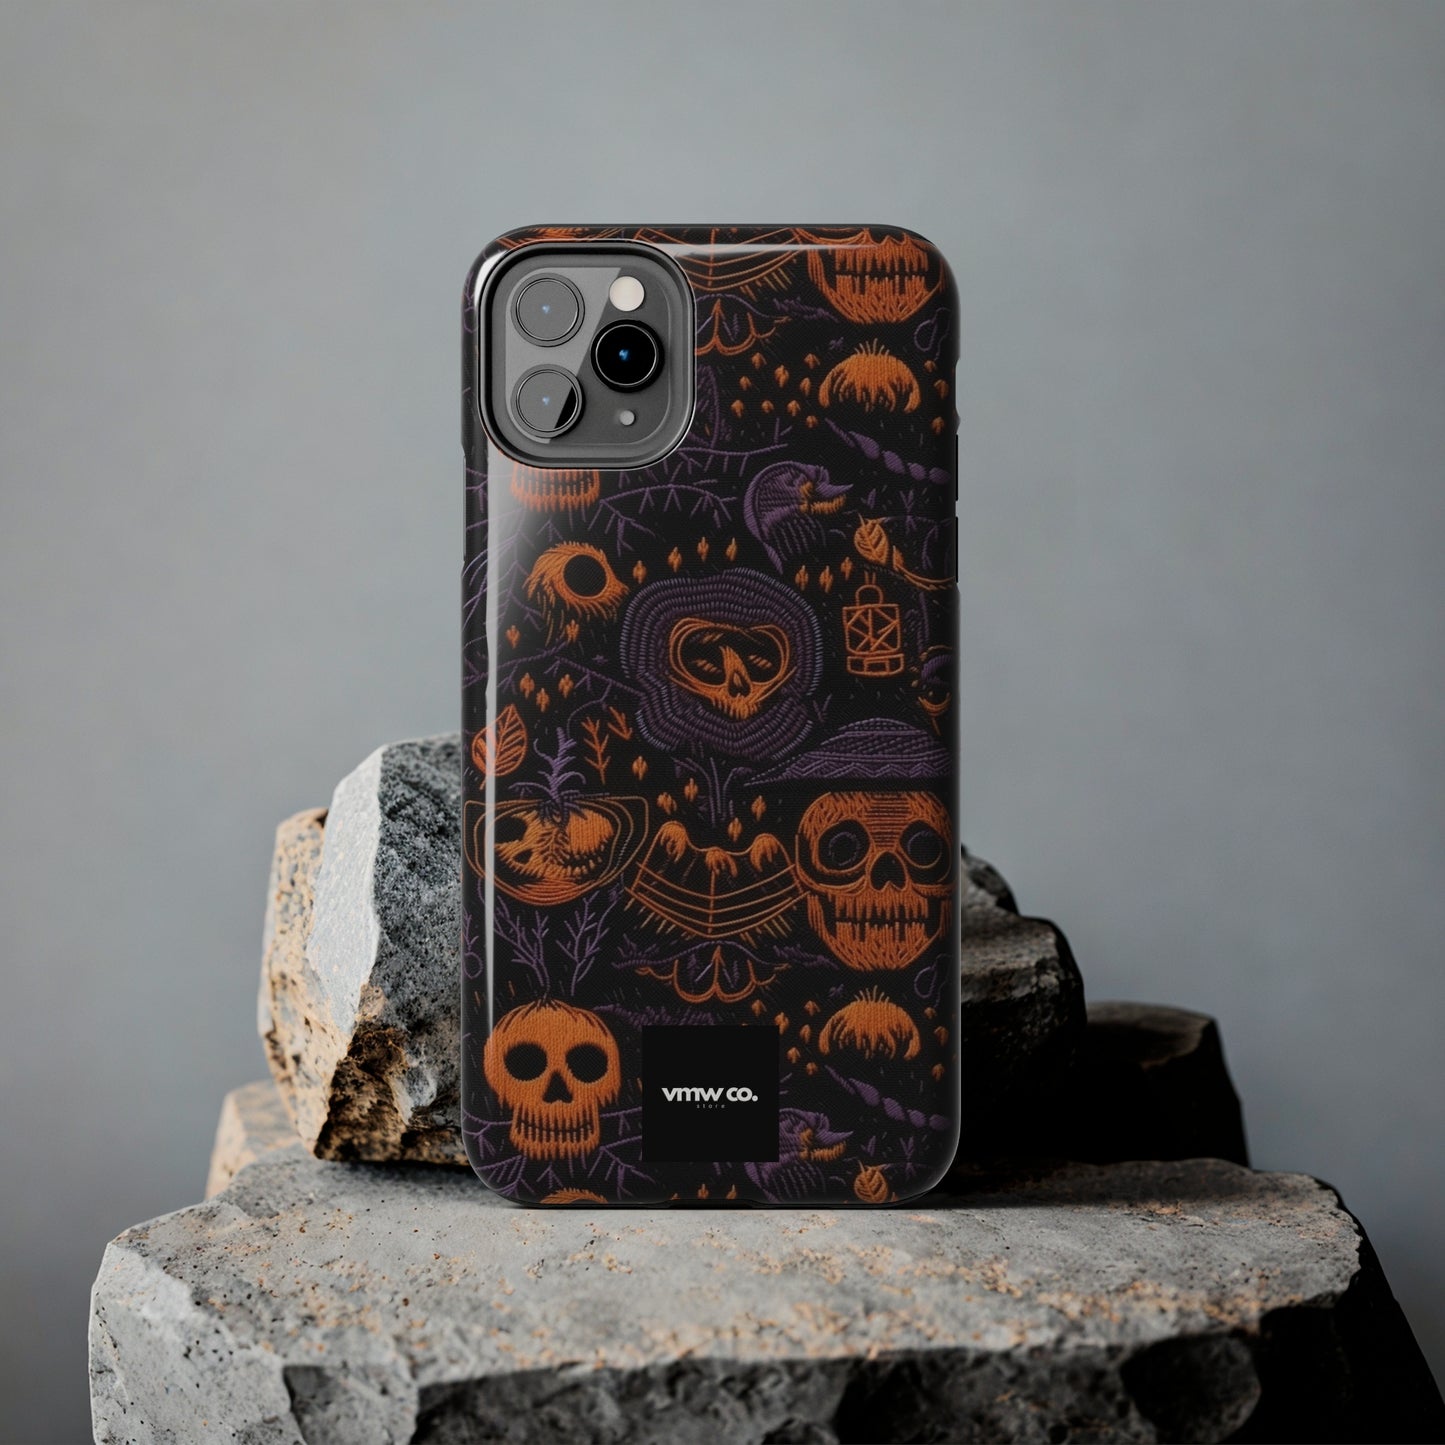 Embroidered Skull Black Purple iPhone Tough Phone Cases